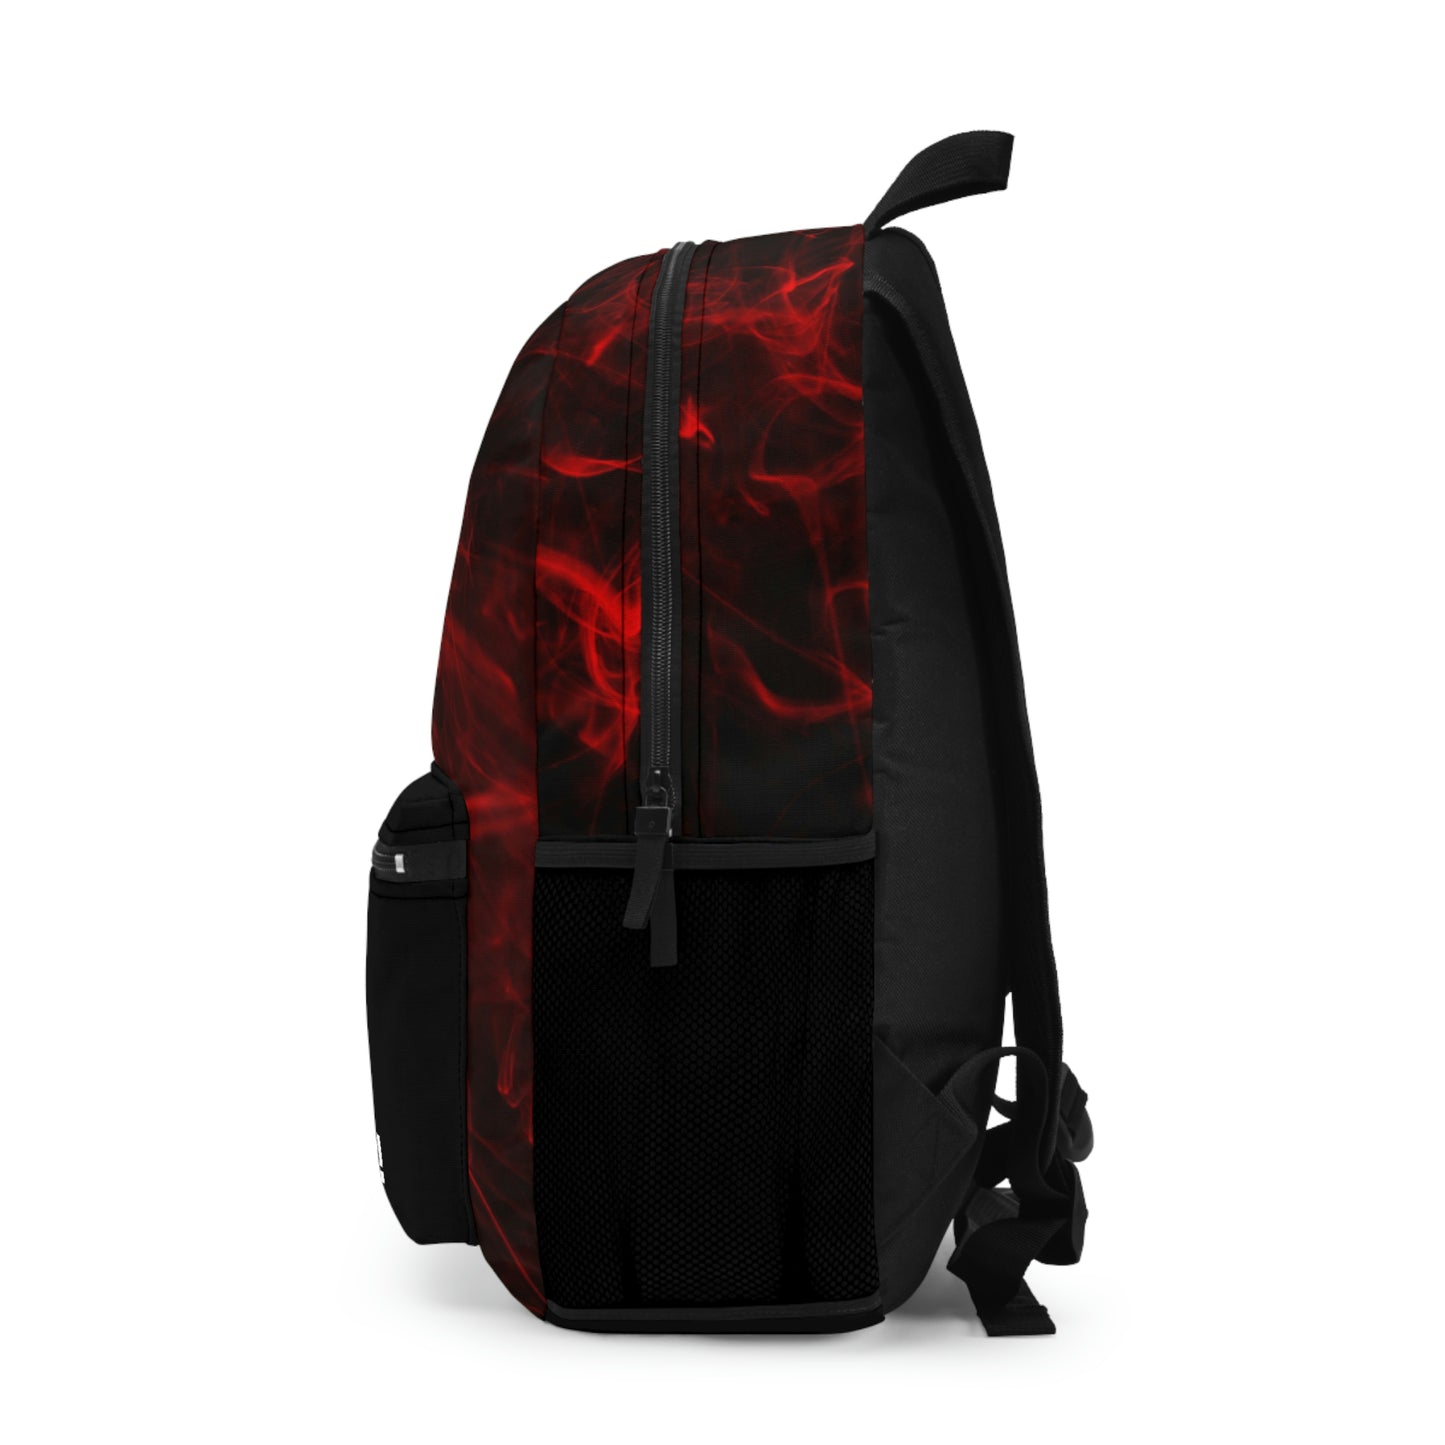 Lean Into It Backpack